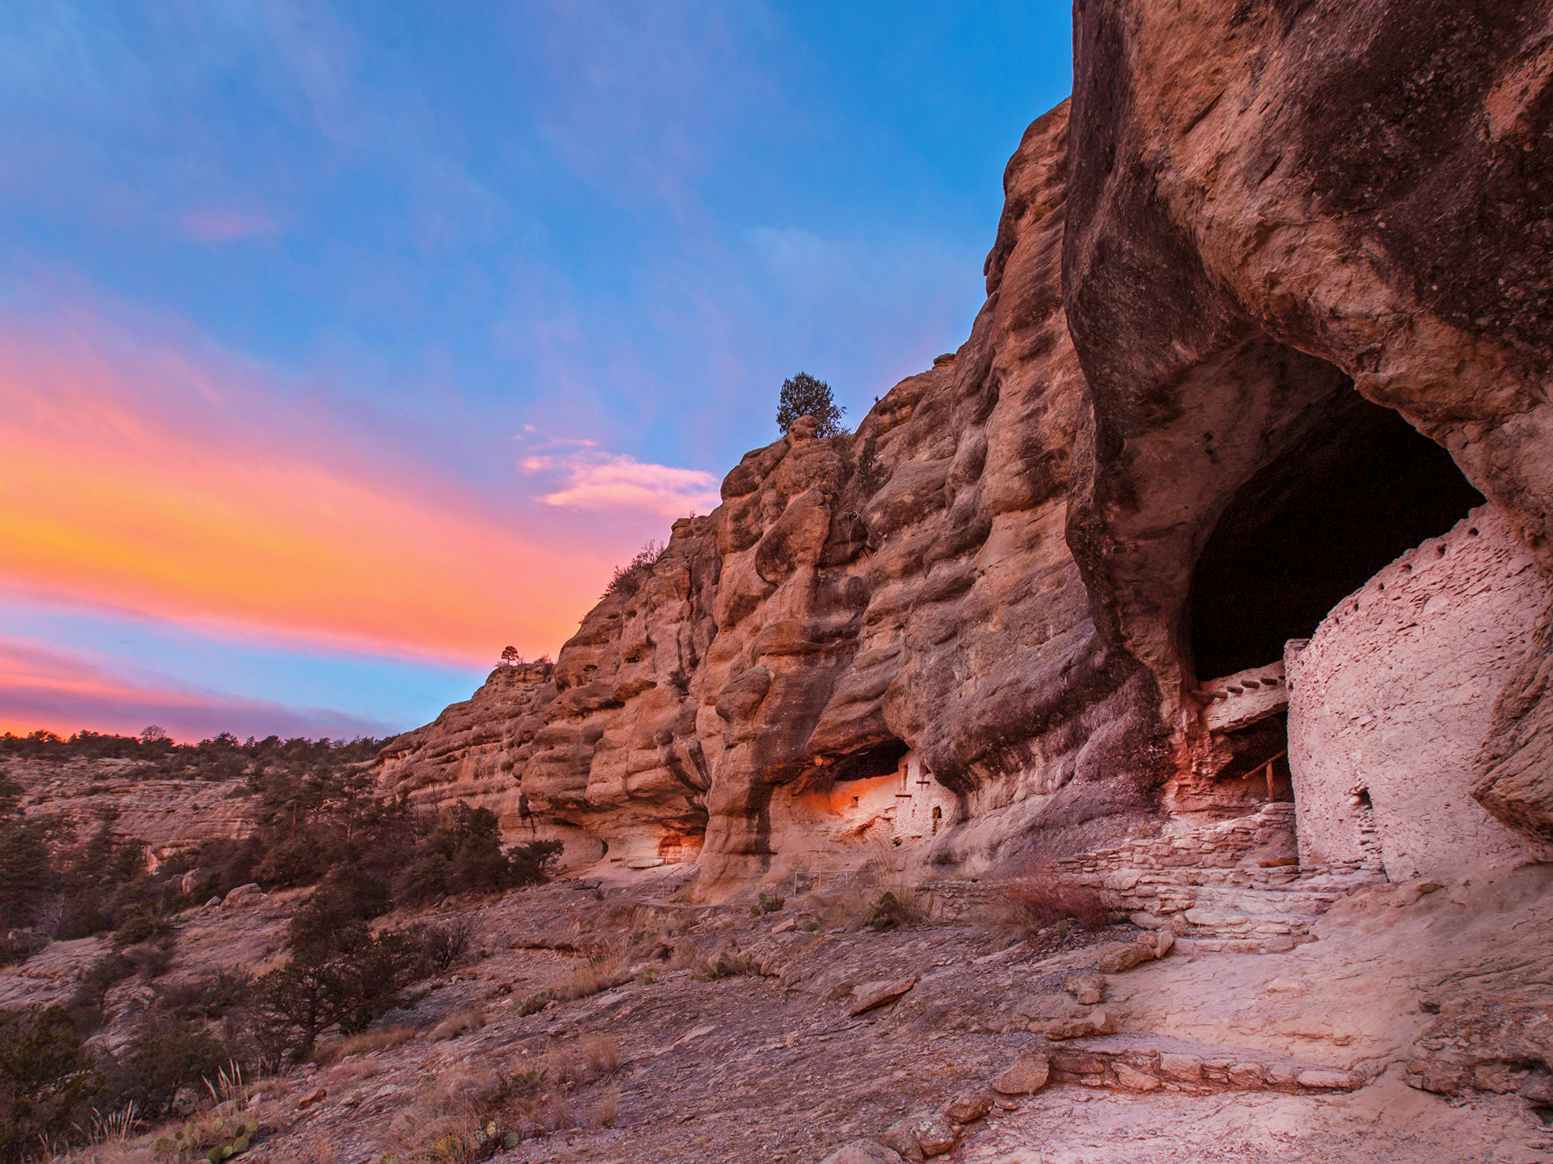 gila cliff dwellings national monument in albuquerque new mexico at dusk